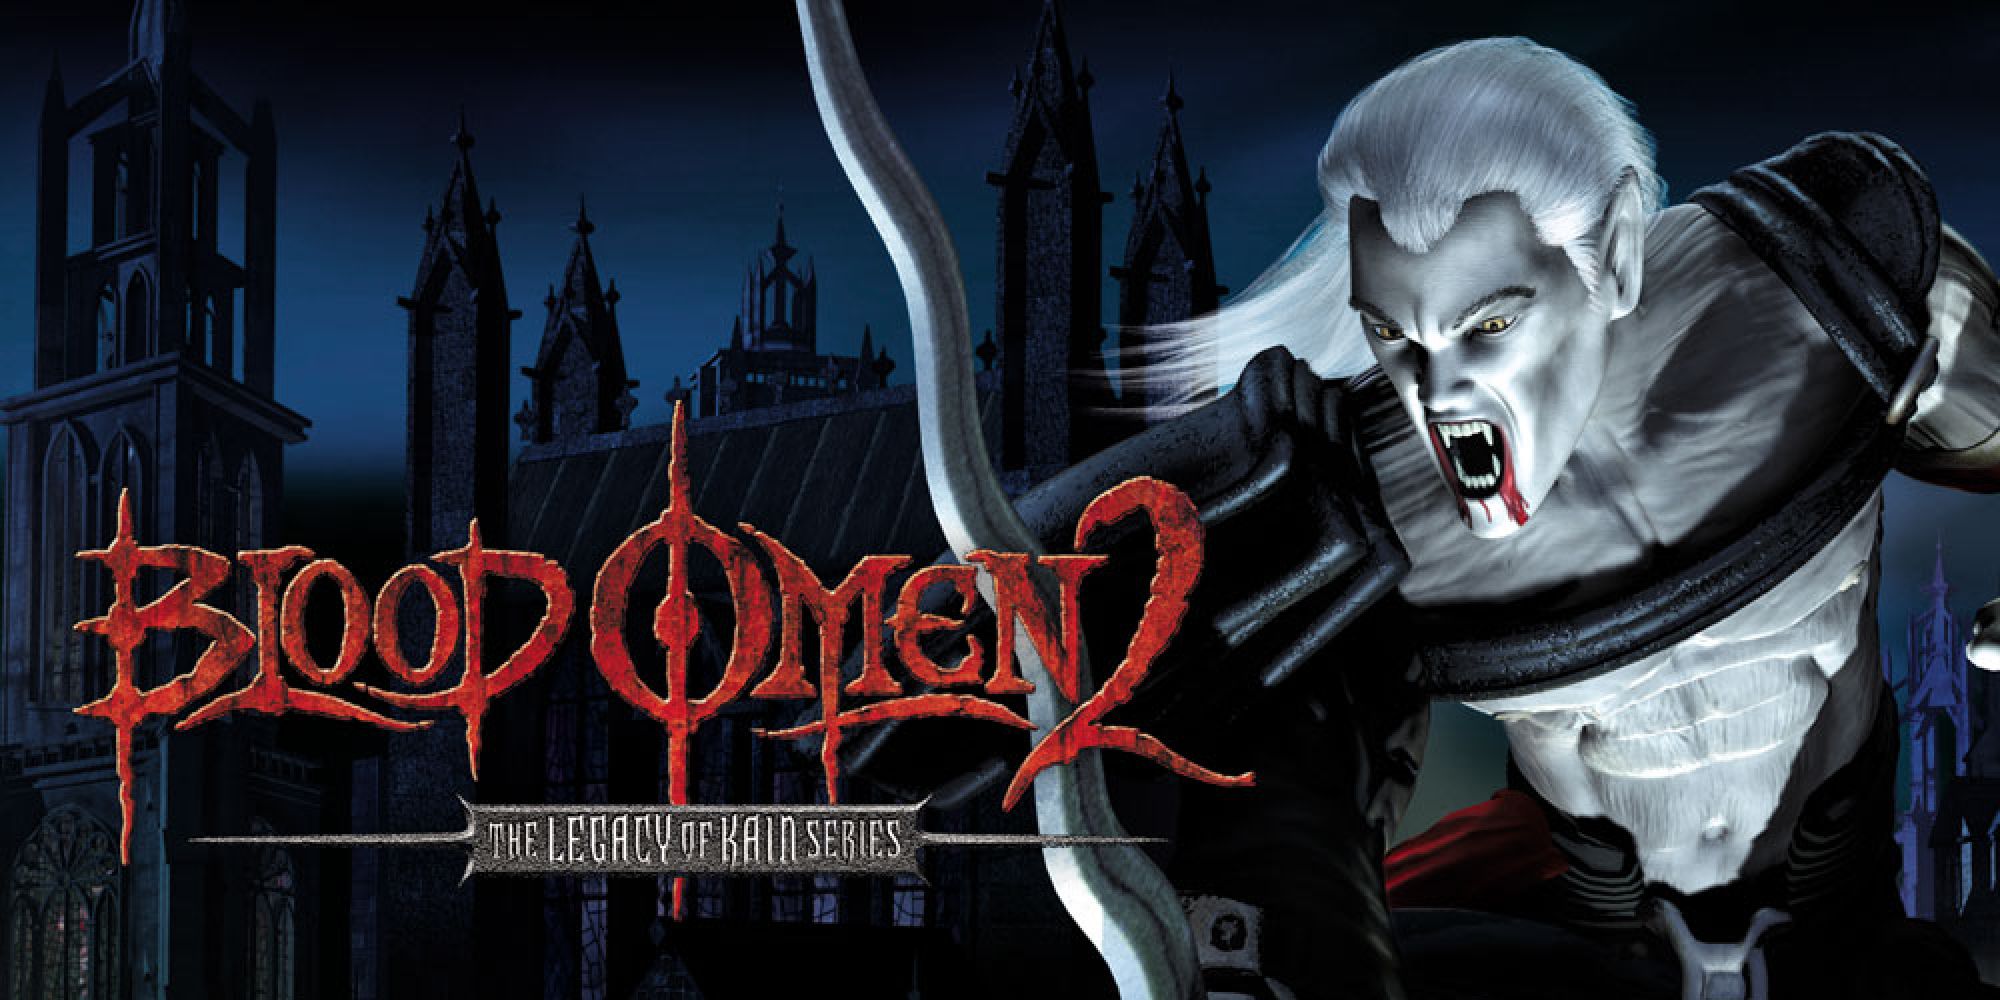 Artwork featuring the title of the game and the titular character, wielding a sword and blood around his roaring mouth.